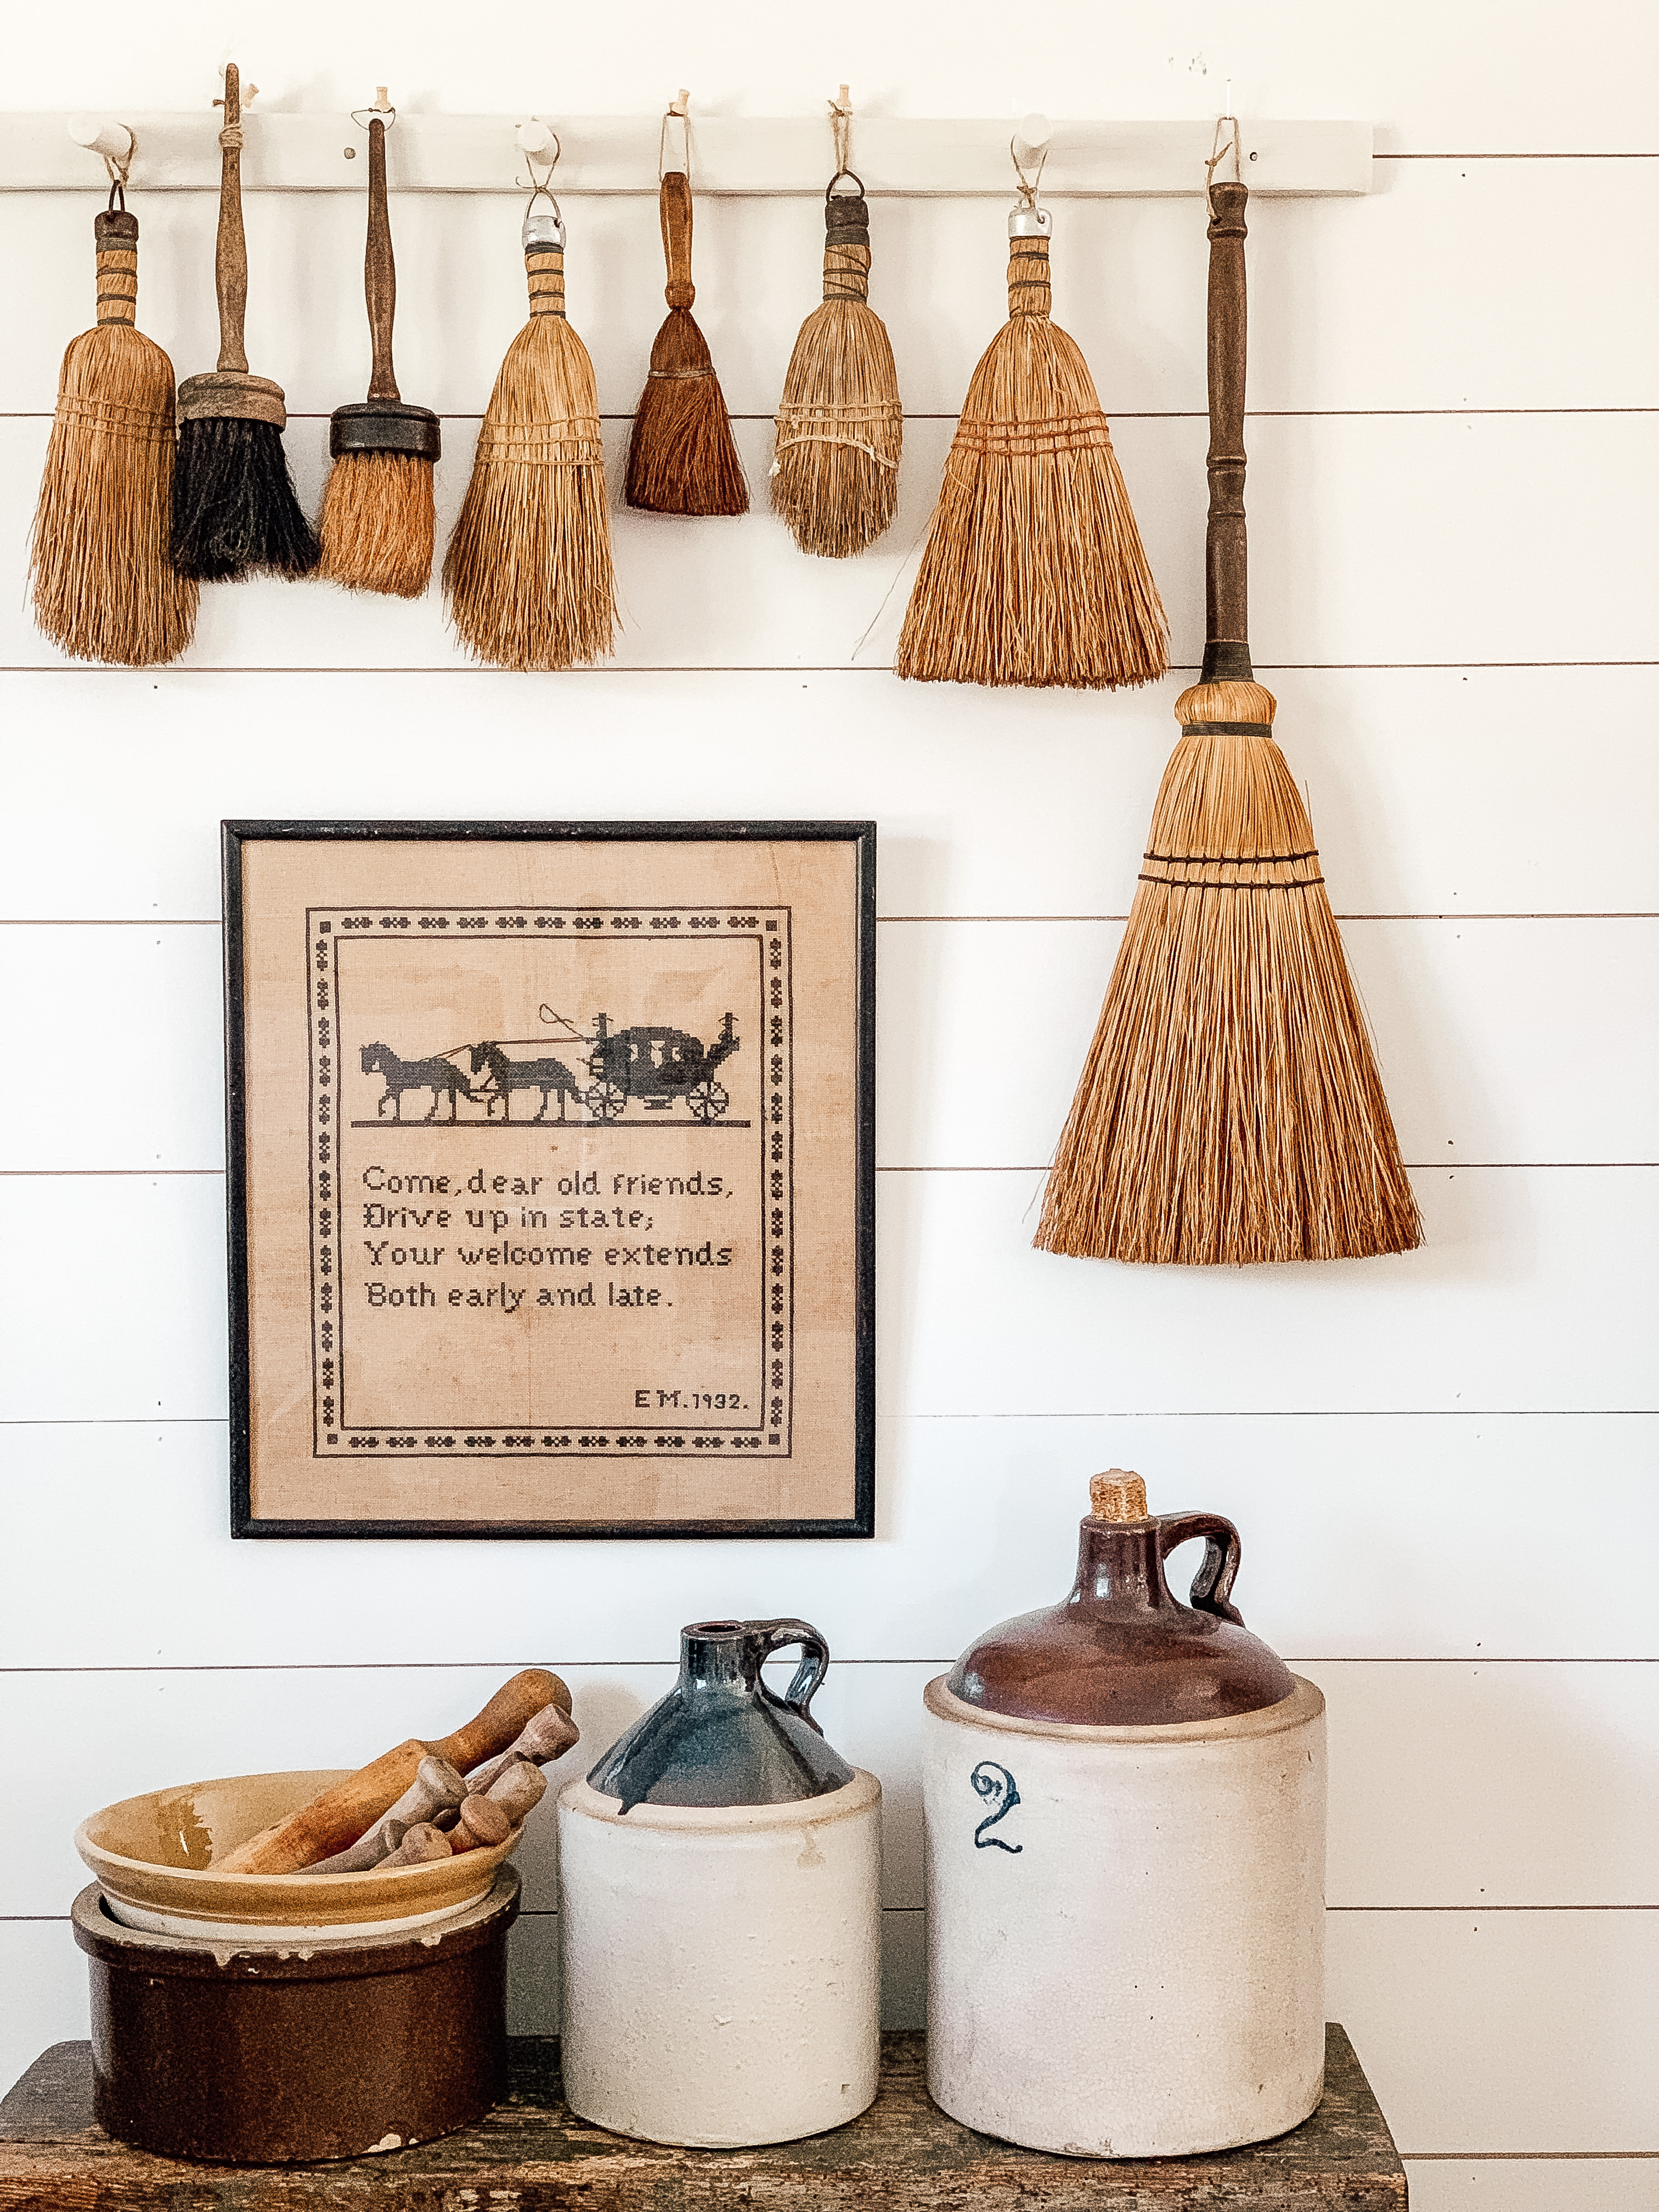 A vintage vignette with crocks, brooms, and a needle point